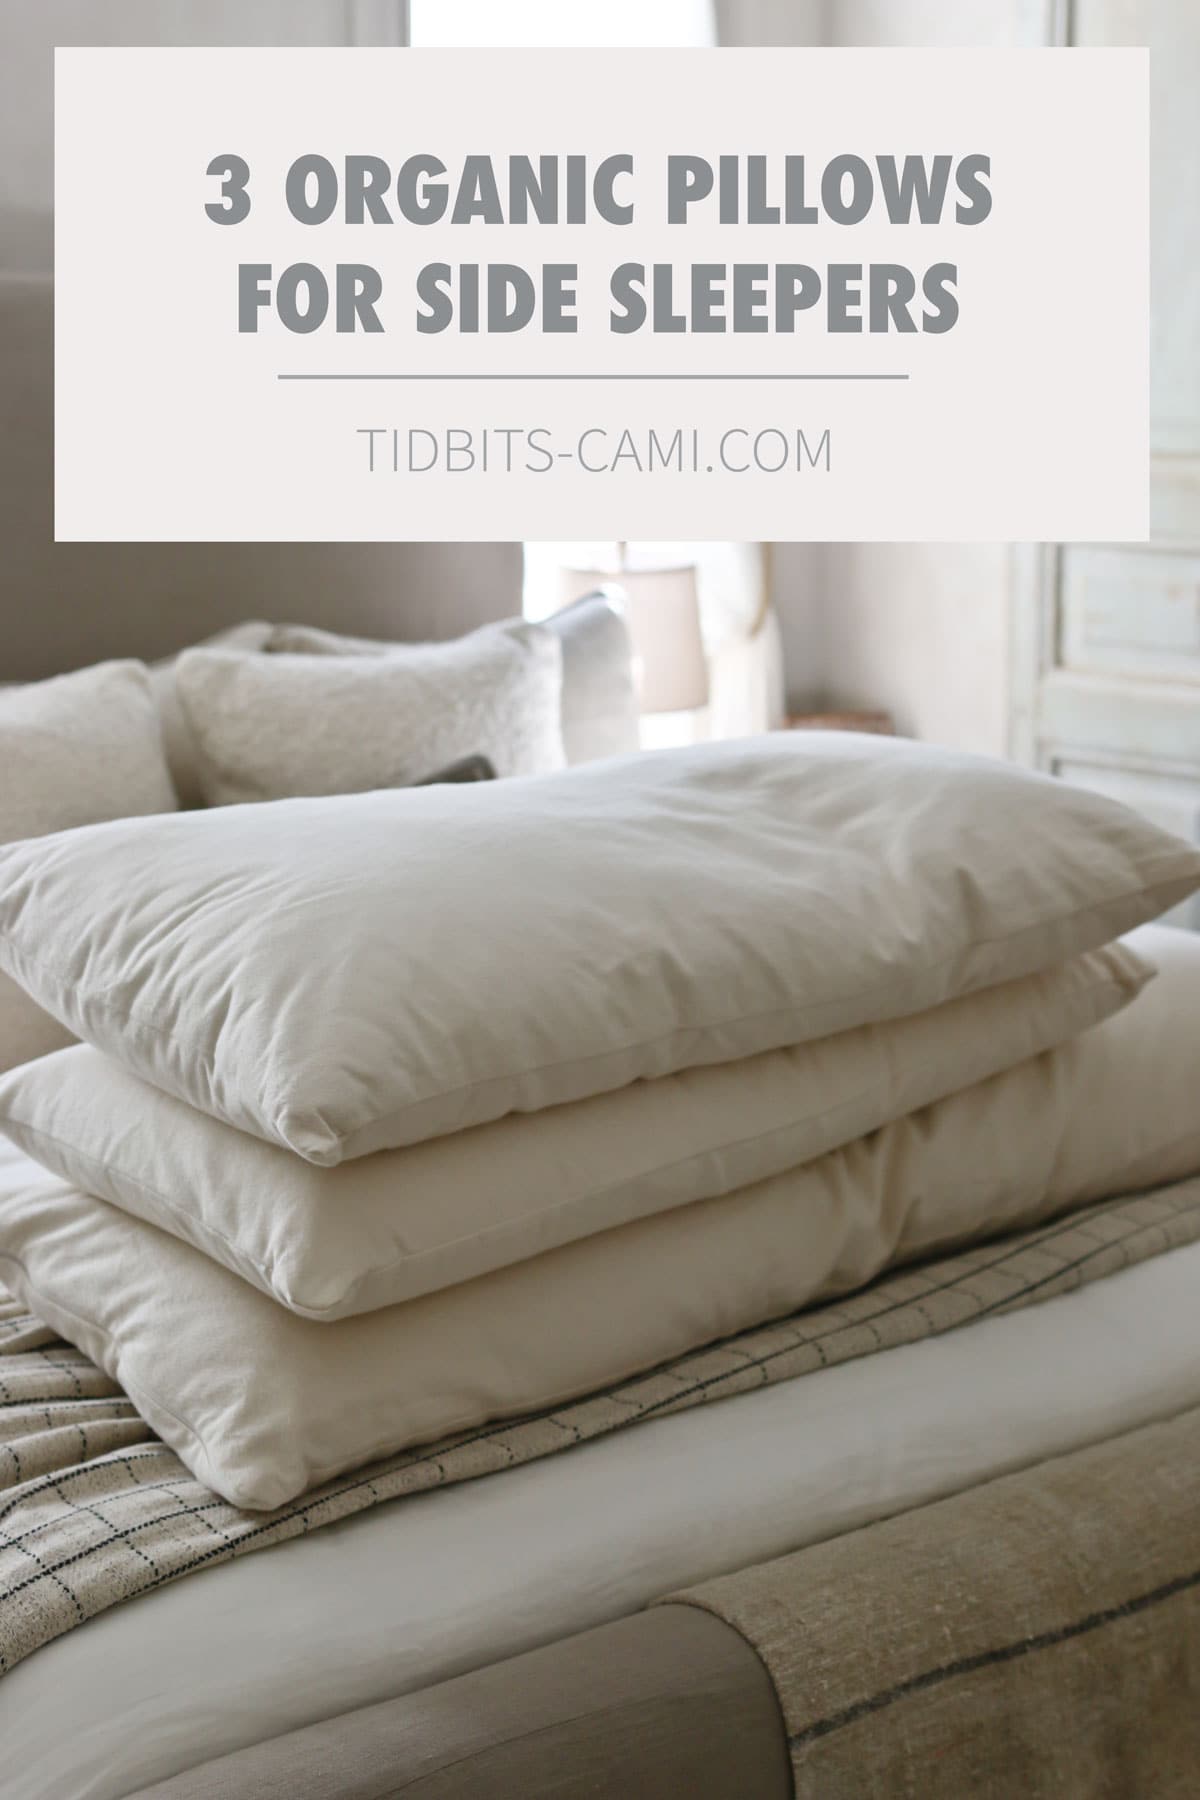 3 organic pillows for side sleepers